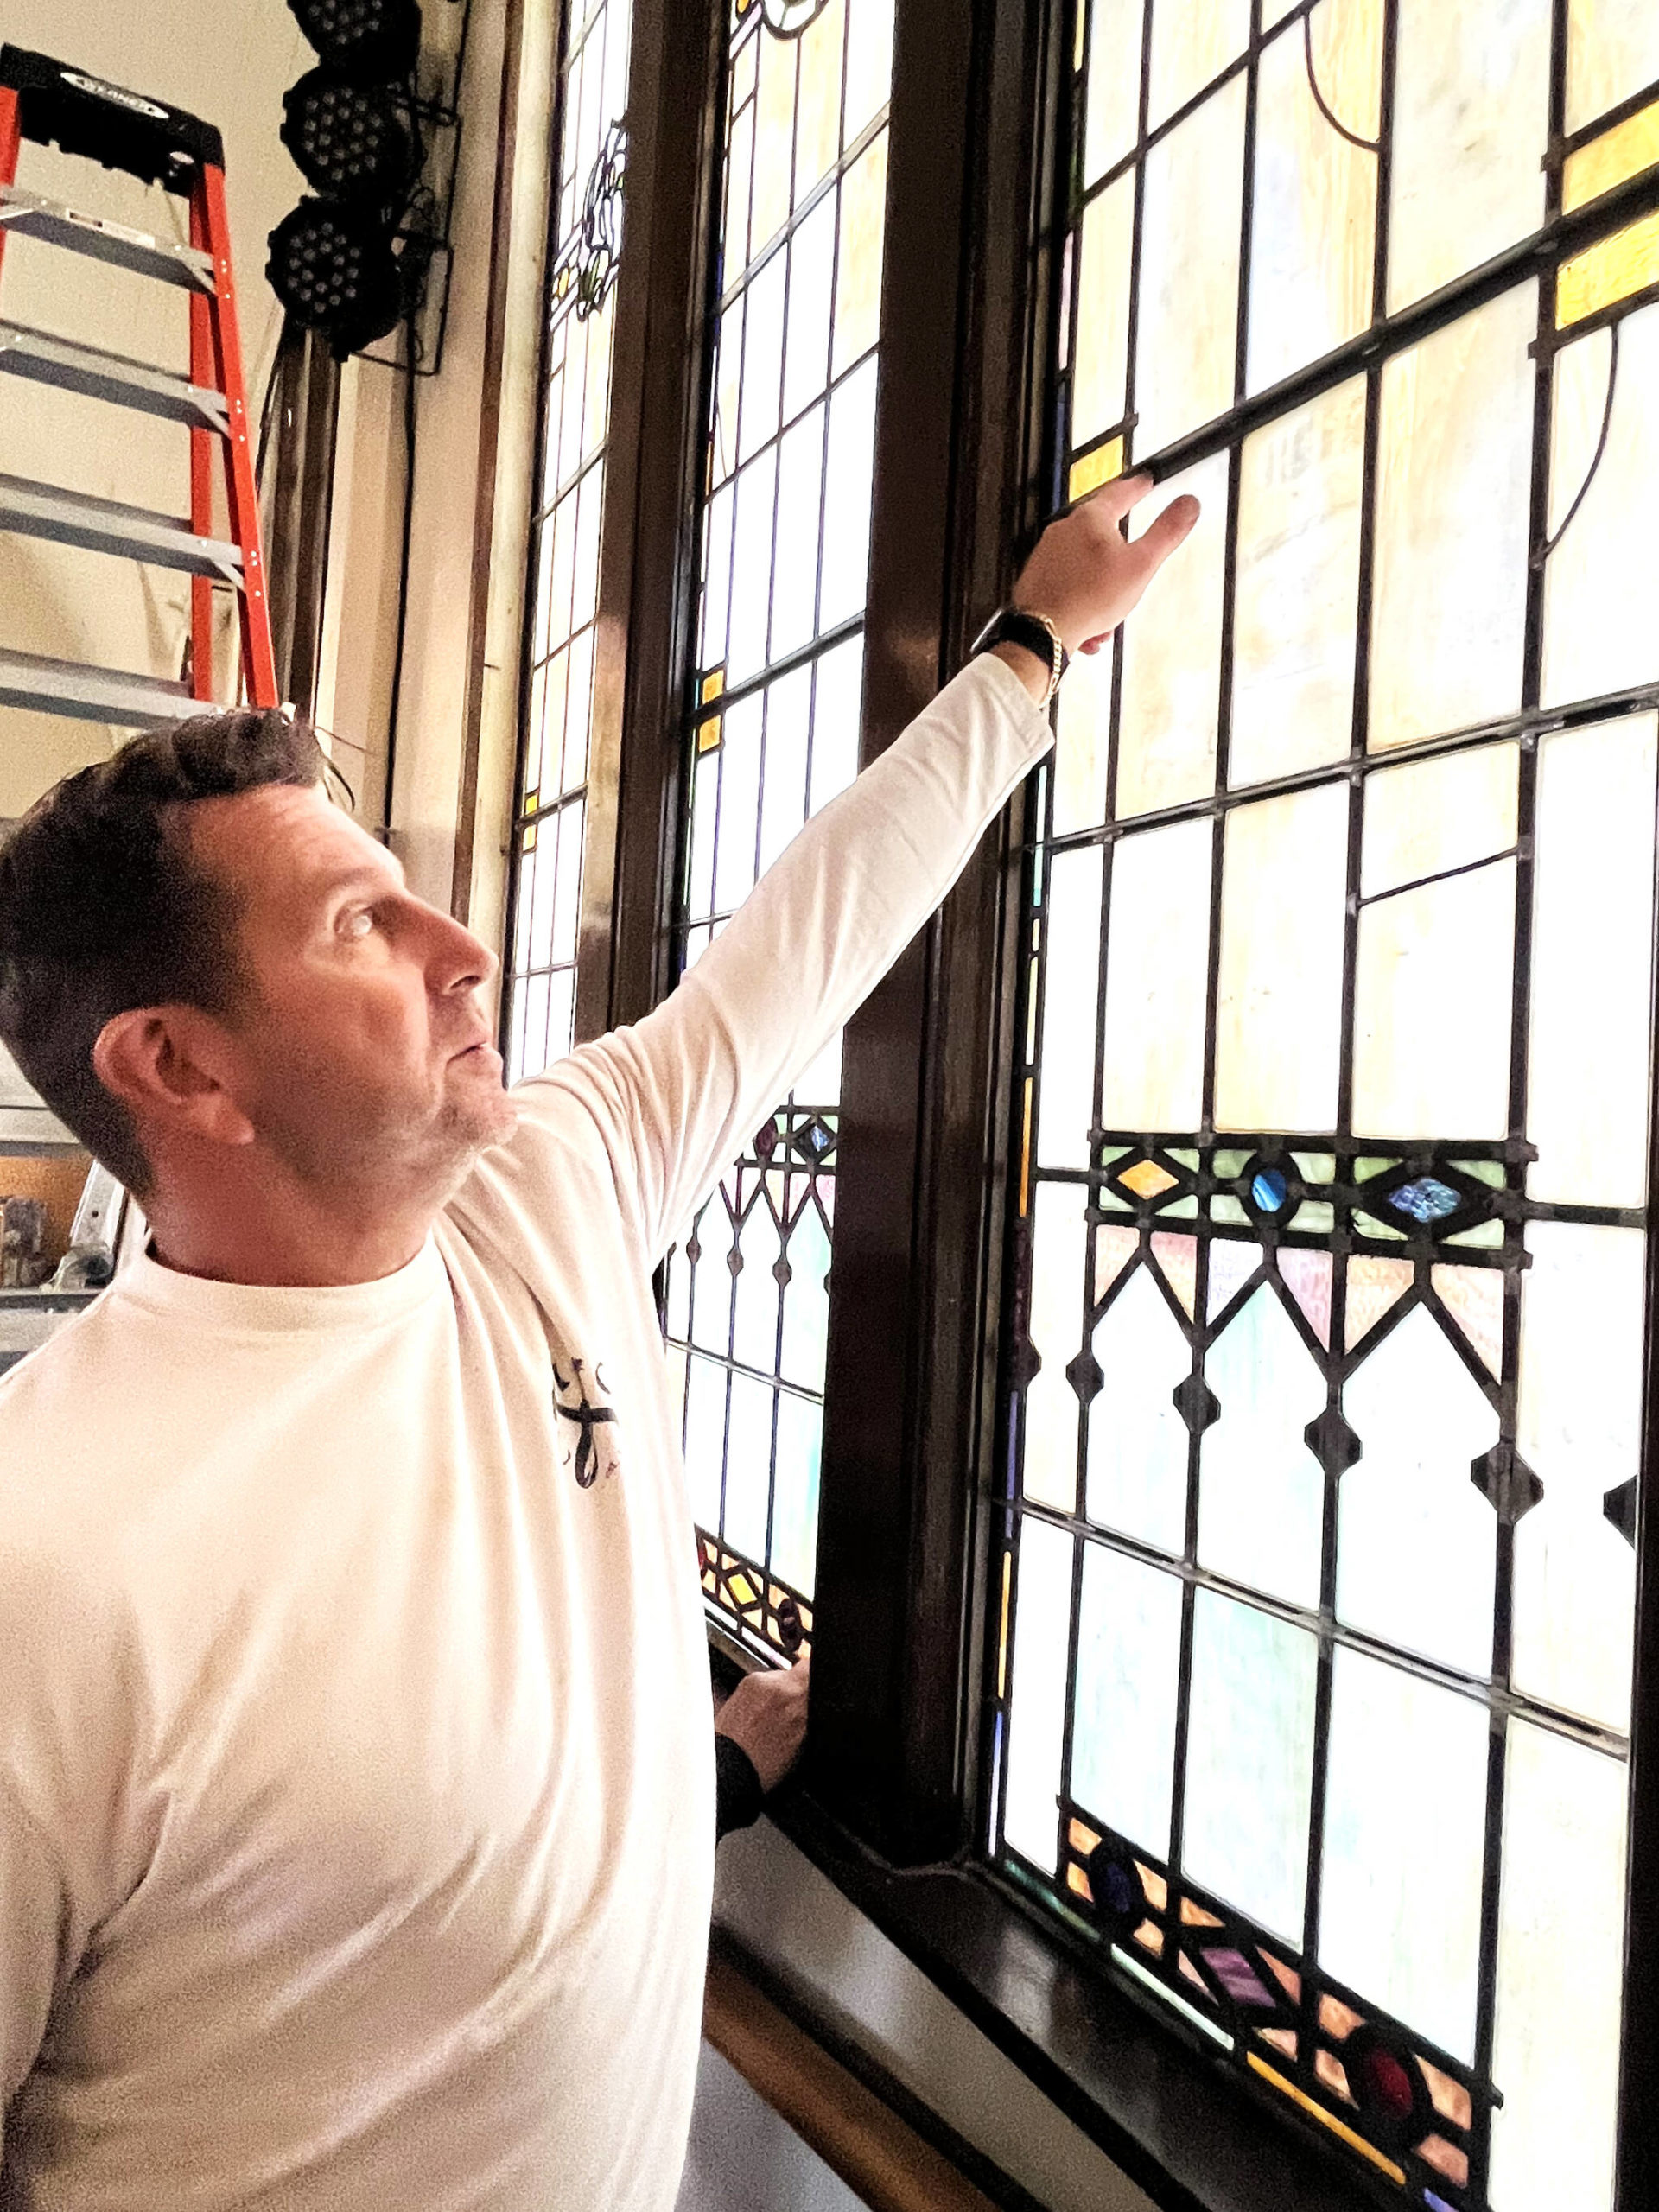 Matthew N. Wells / The Daily World 
Eric Penic, president of Cathedral Crafts Stained Glass Company, out of Winona, Minnesota, explains how the stained glass at Amazing Grace Lutheran Church of Grays Harbor wasn’t too hard to lift or place. He’s pointing to the support braces for the lancets that split the windows into different panels, which makes the windows easier to lift and place.